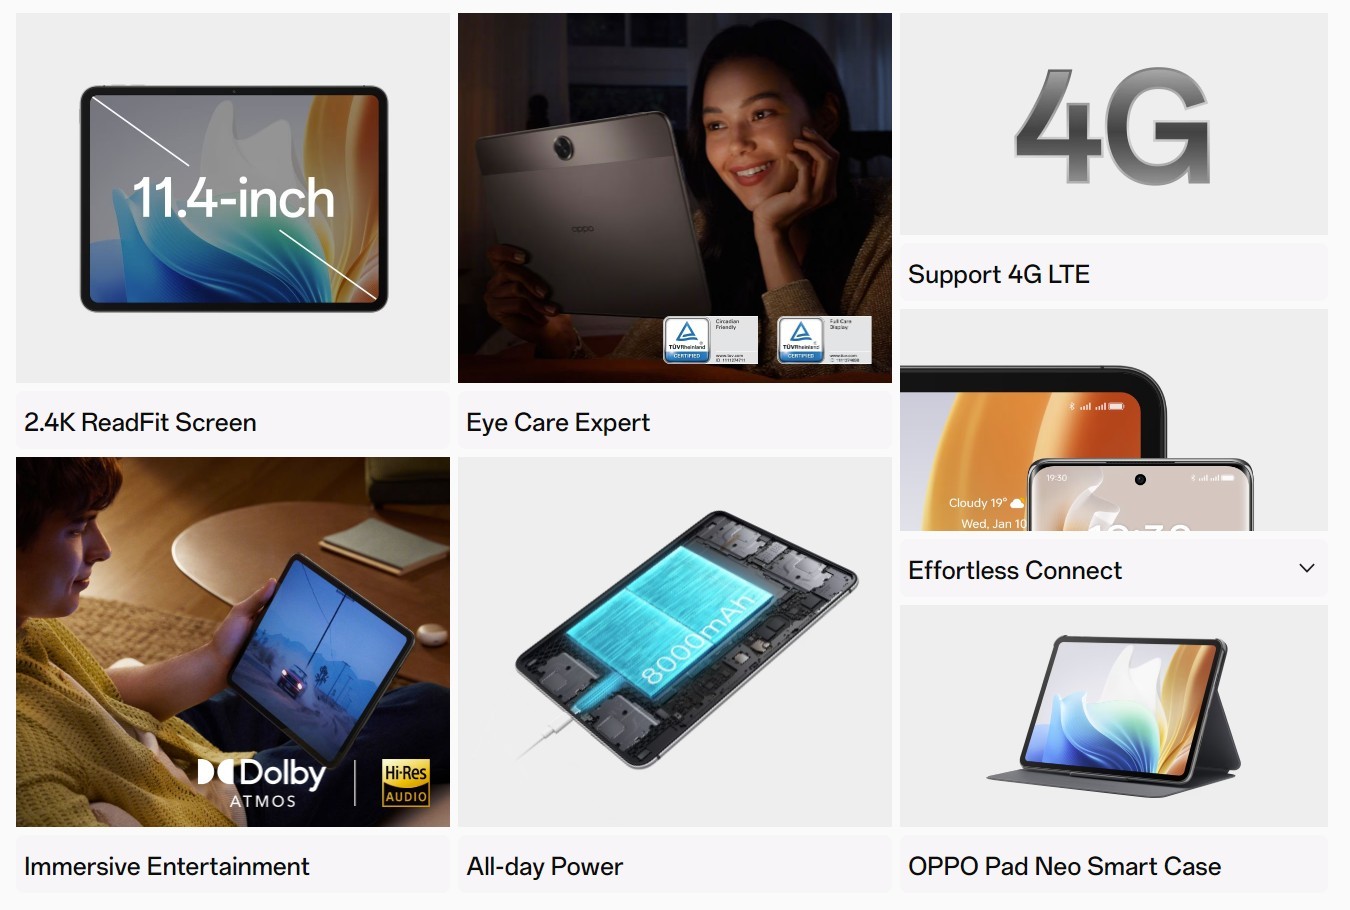 Oppo Pad Neo launches in Malaysia, an affordable 11.35'' tablet with optional LTE